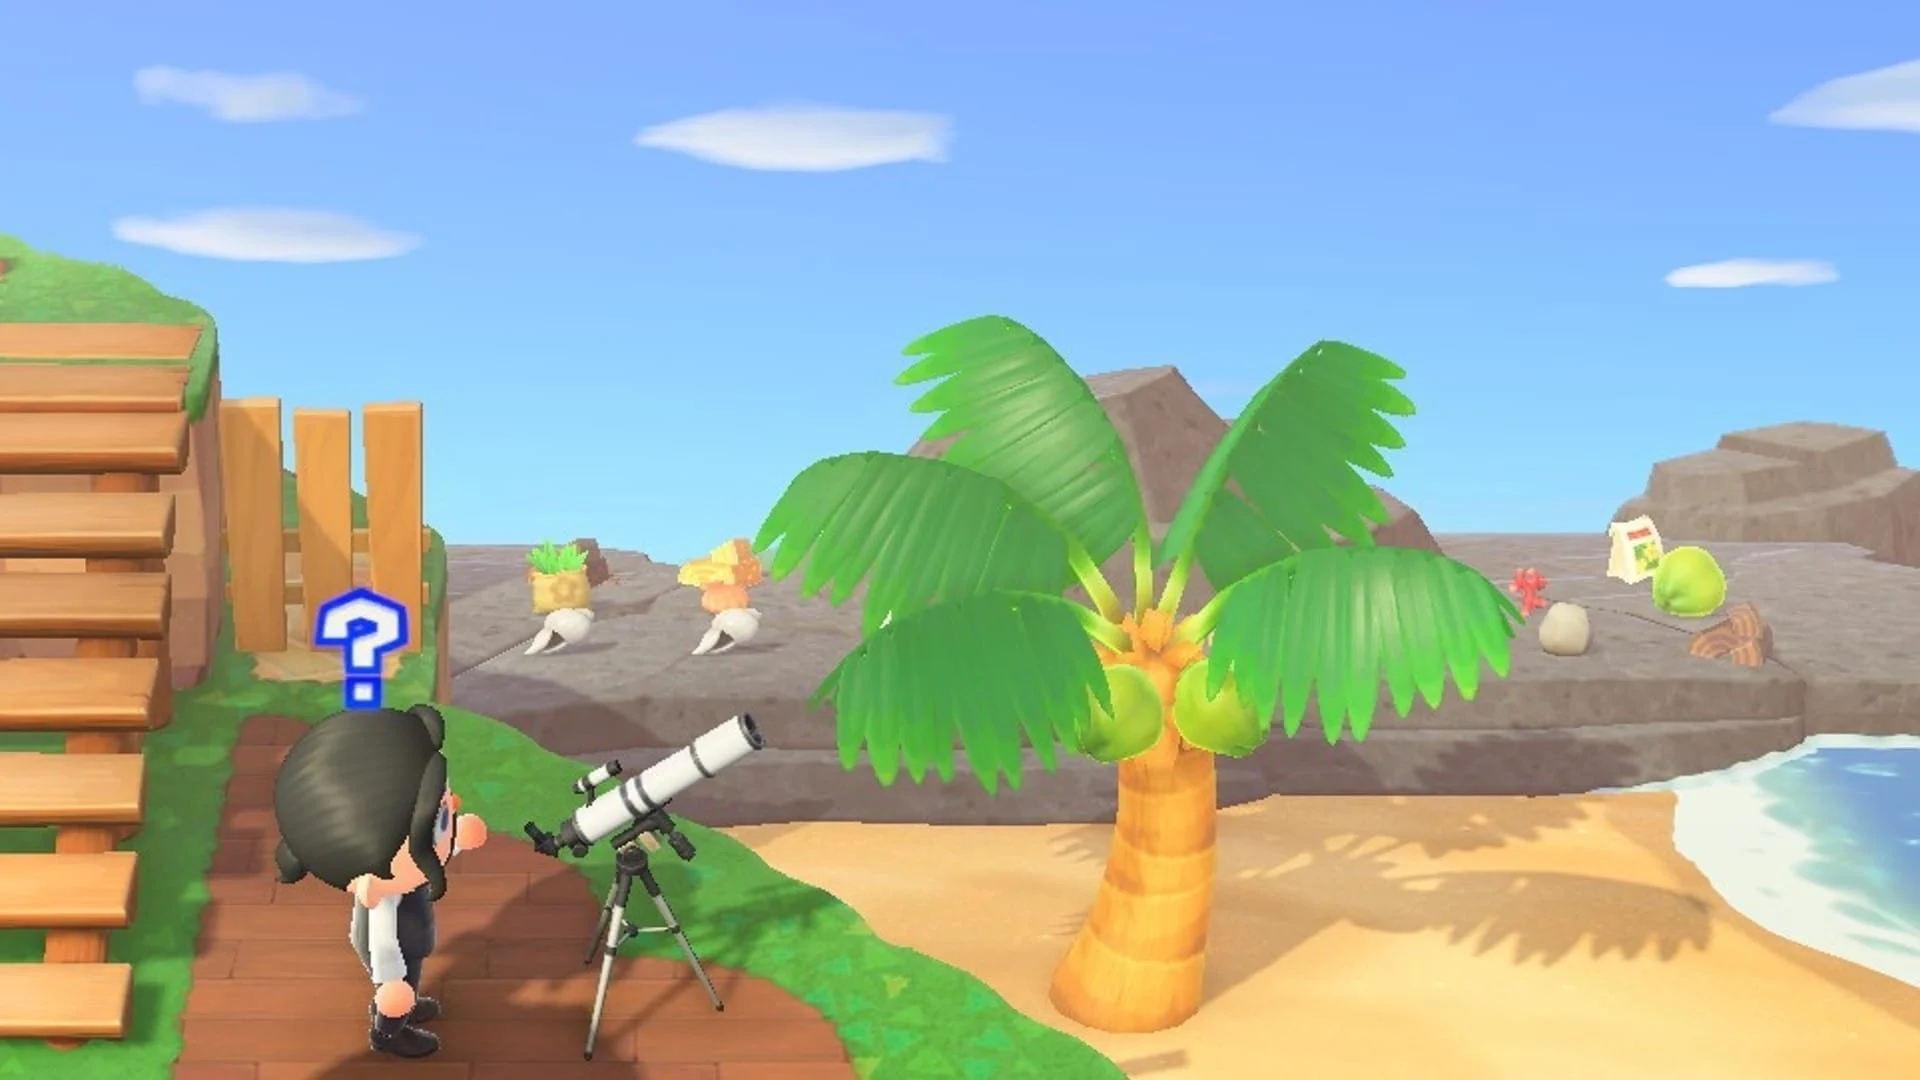 Game player using a telescope foe checking the weather, tree,ocean and stones in the background